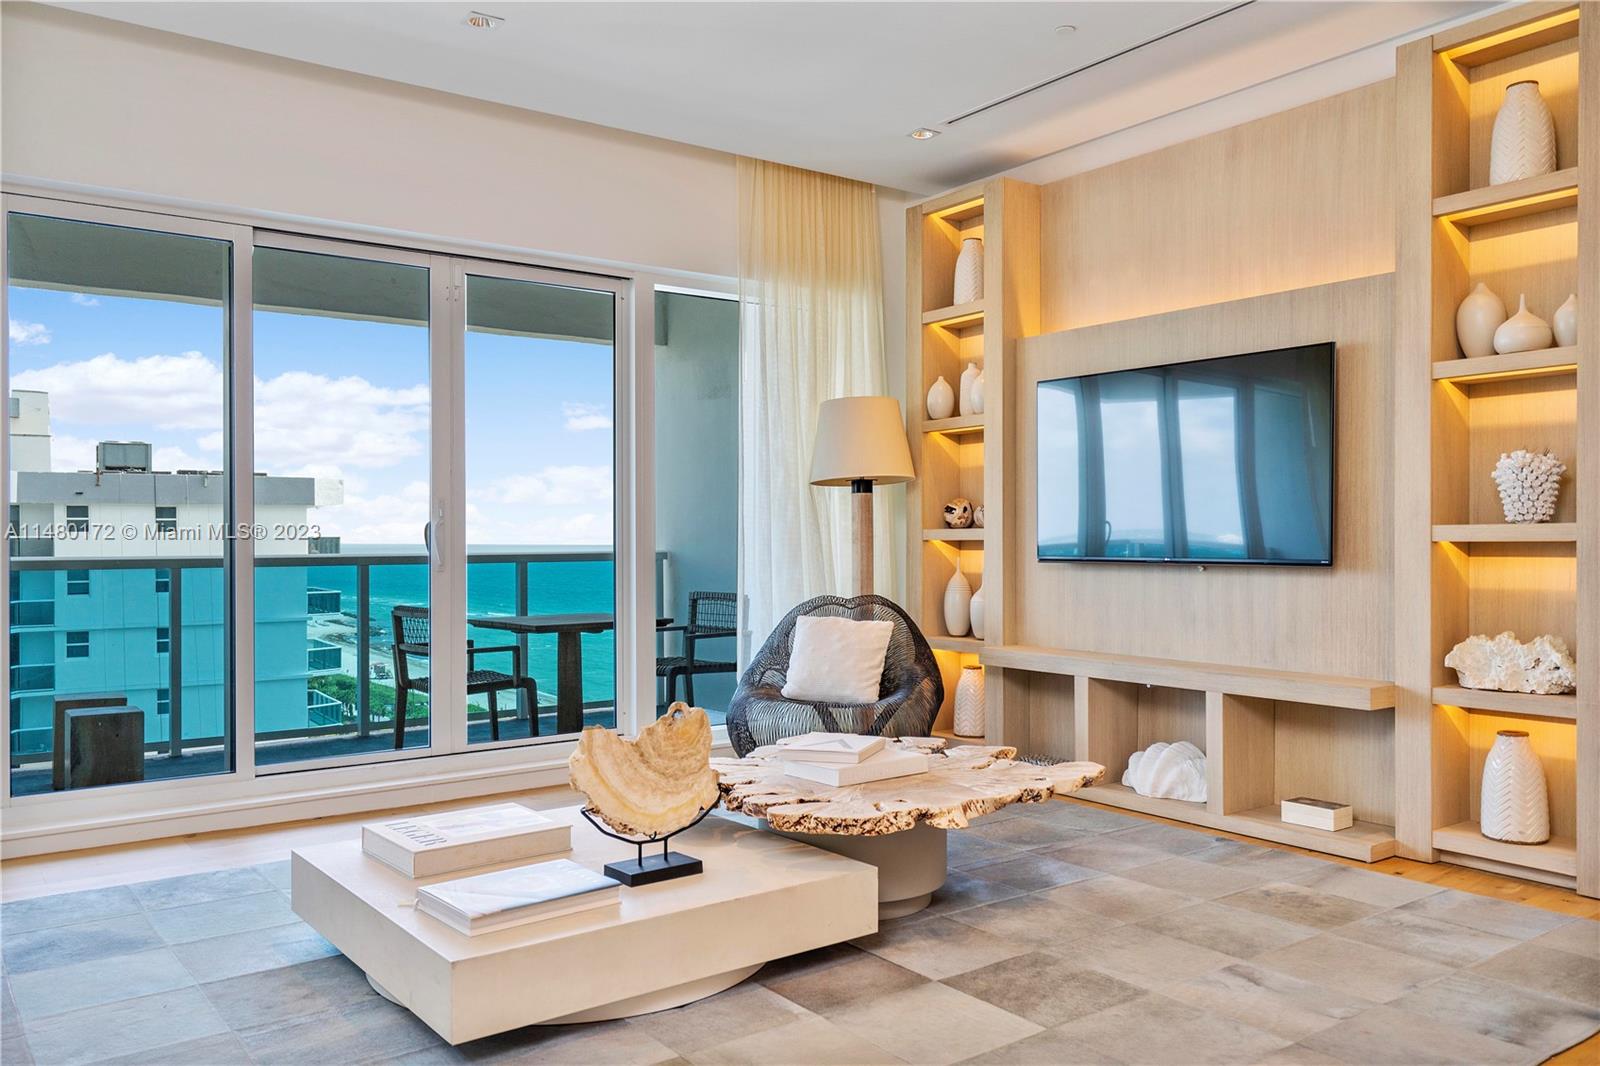 Enter a realm of pure opulence in this spectacular 2-bedroom, 2.5-bathroom penthouse. A seamless fusion of the finest 1 Hotel and Arte Facto furnishings creates a space that is the epitome of sophistication and luxury. This oceanfront oasis offers a den with a luxurious sofa and TV, a space designed for relaxation and entertainment. Access a 14,000 sq. ft. gym, serene spa, and chauffeured cars. Reside in one of Miami Beach's most prestigious addresses with a private rooftop pool, four restaurants, bars, and more. Partnering with Five Star Luxury Travel, this property generates remarkable rental income, adding to its allure. Owning this penthouse means more than just experiencing luxury; it also means enjoying a steady income stream.